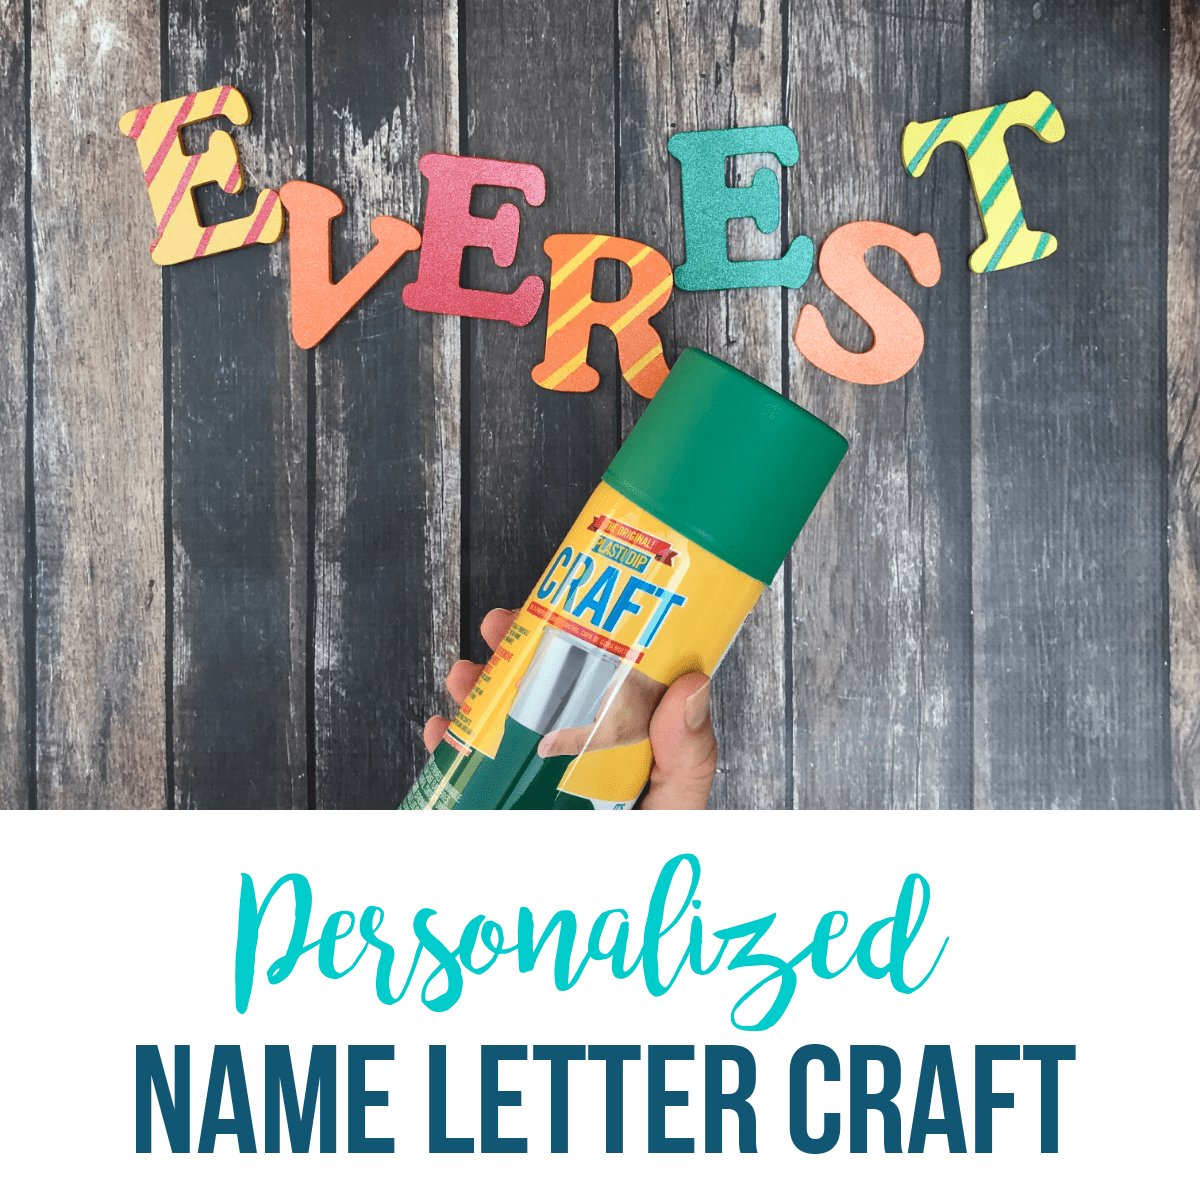 DIY Spray Paint Craft with colorful wooden Letters